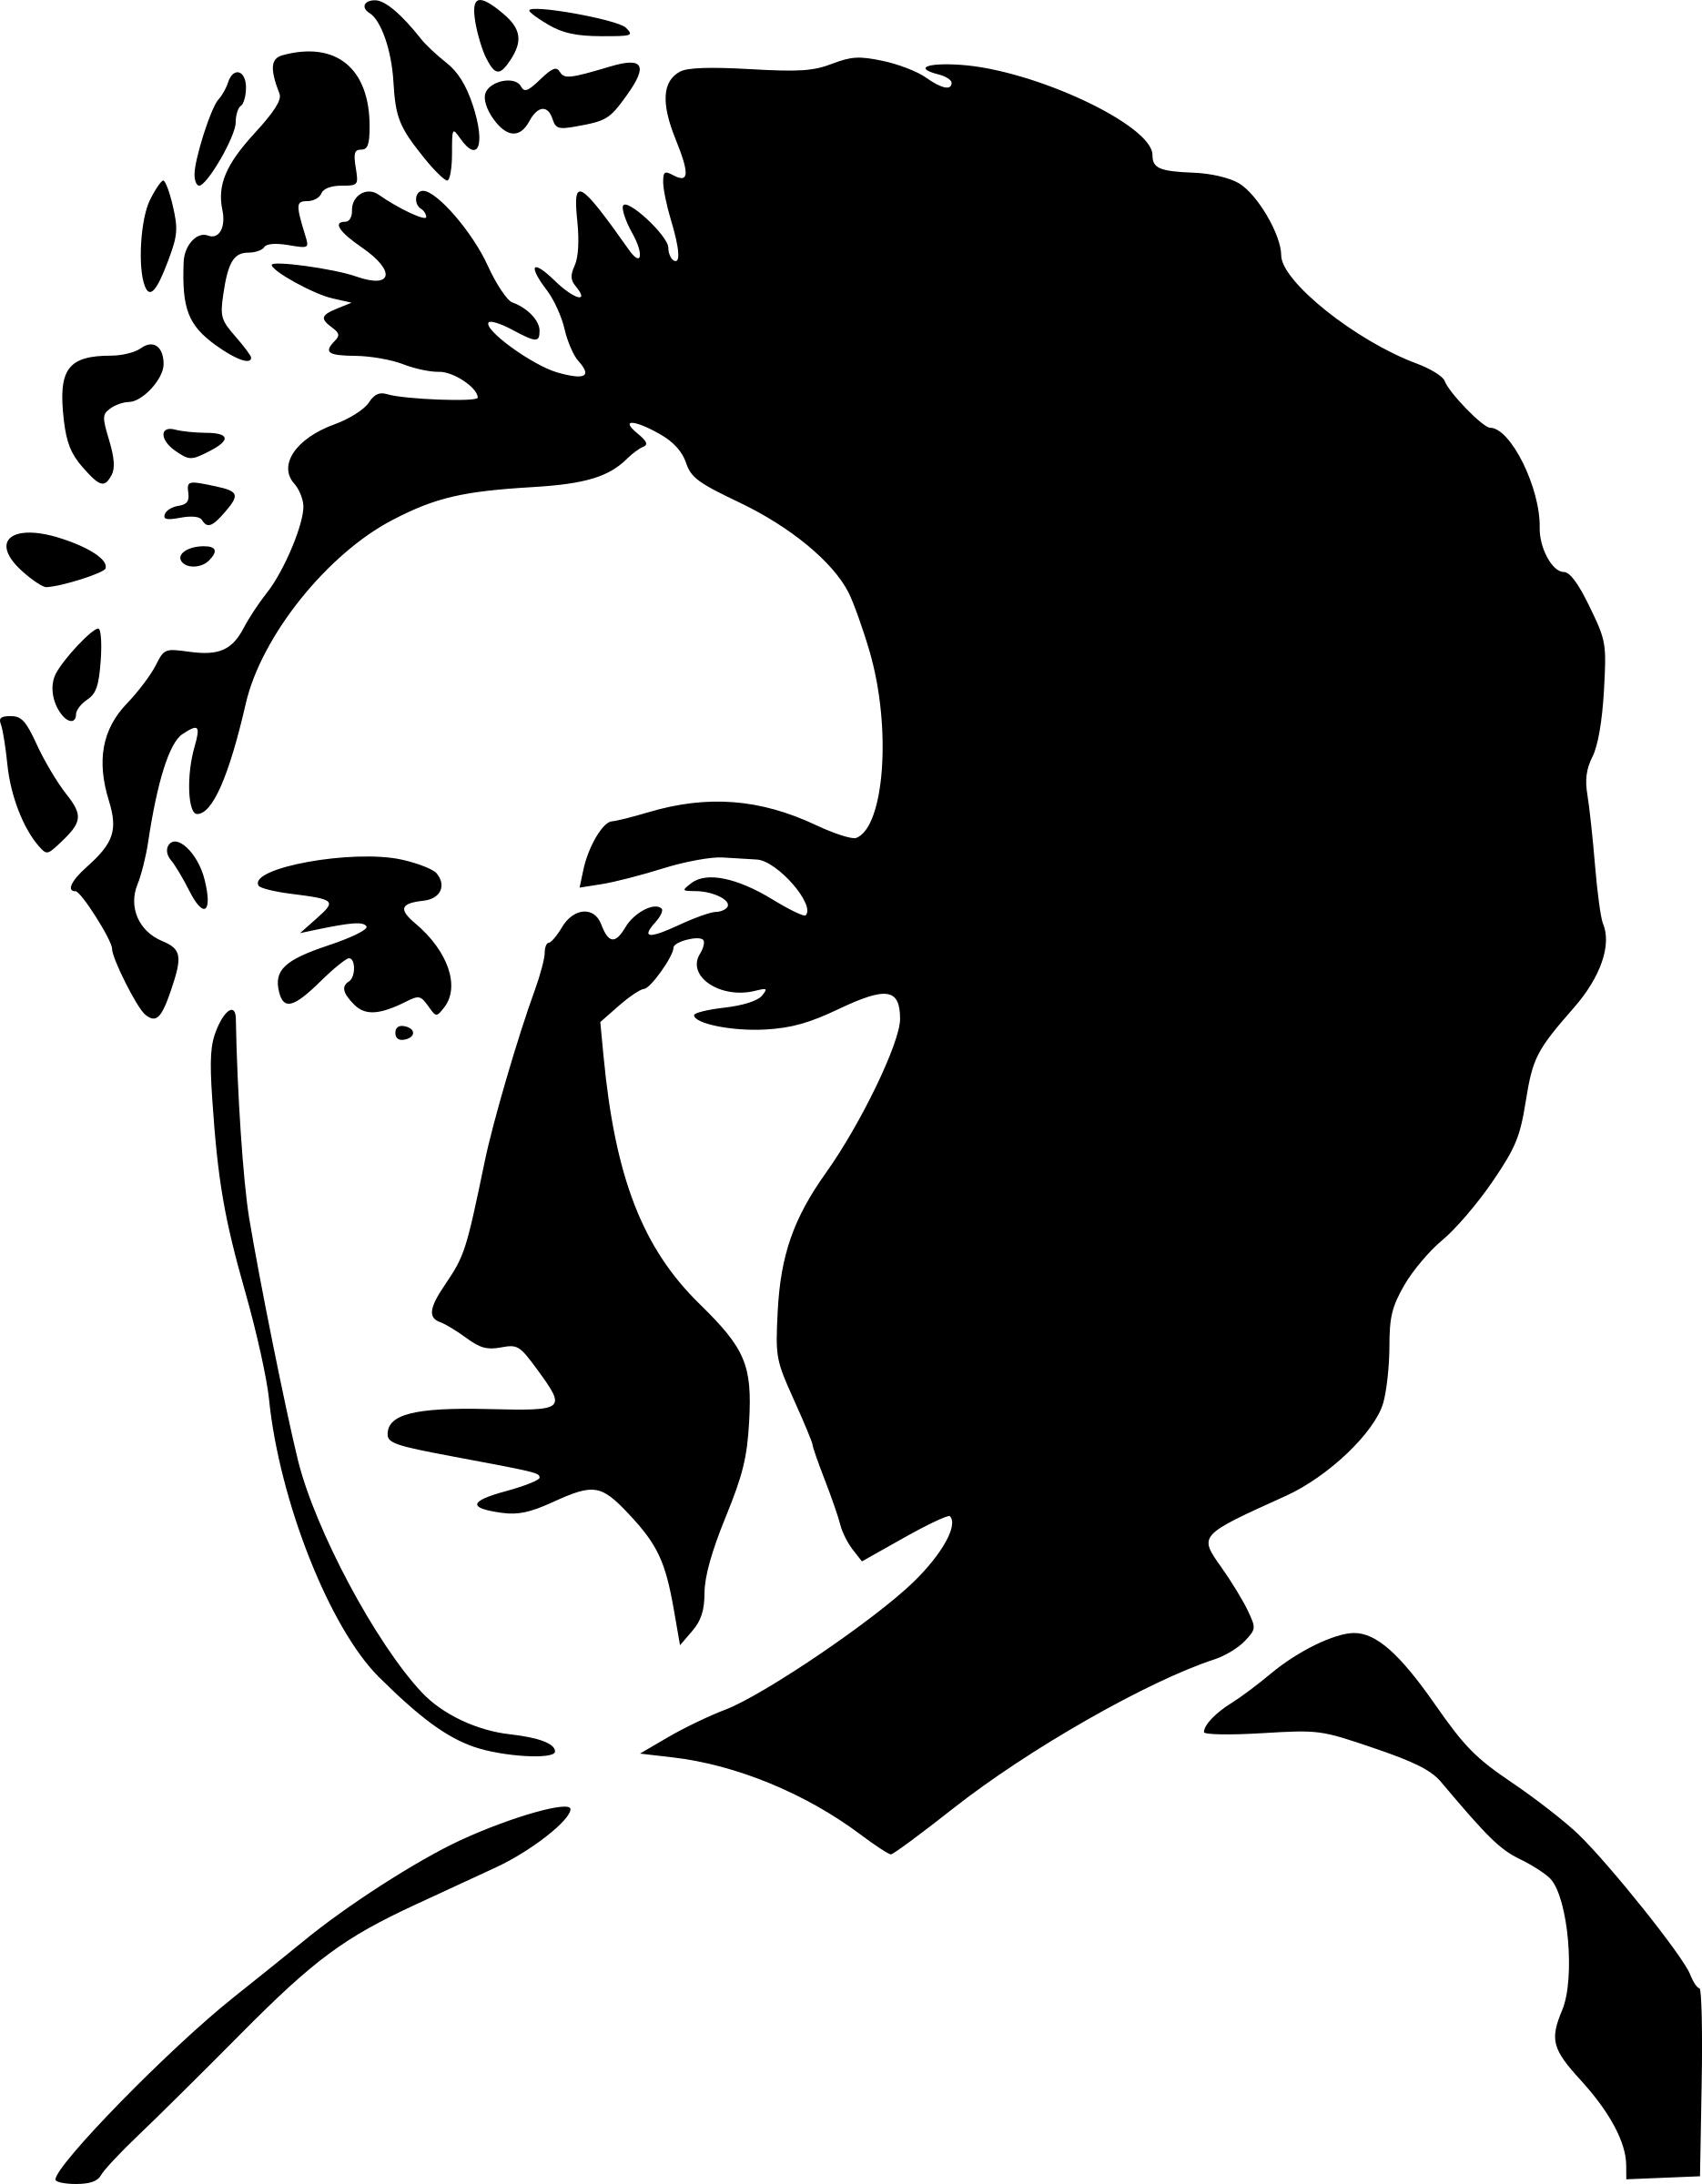 rosa luxemburg PNG icons